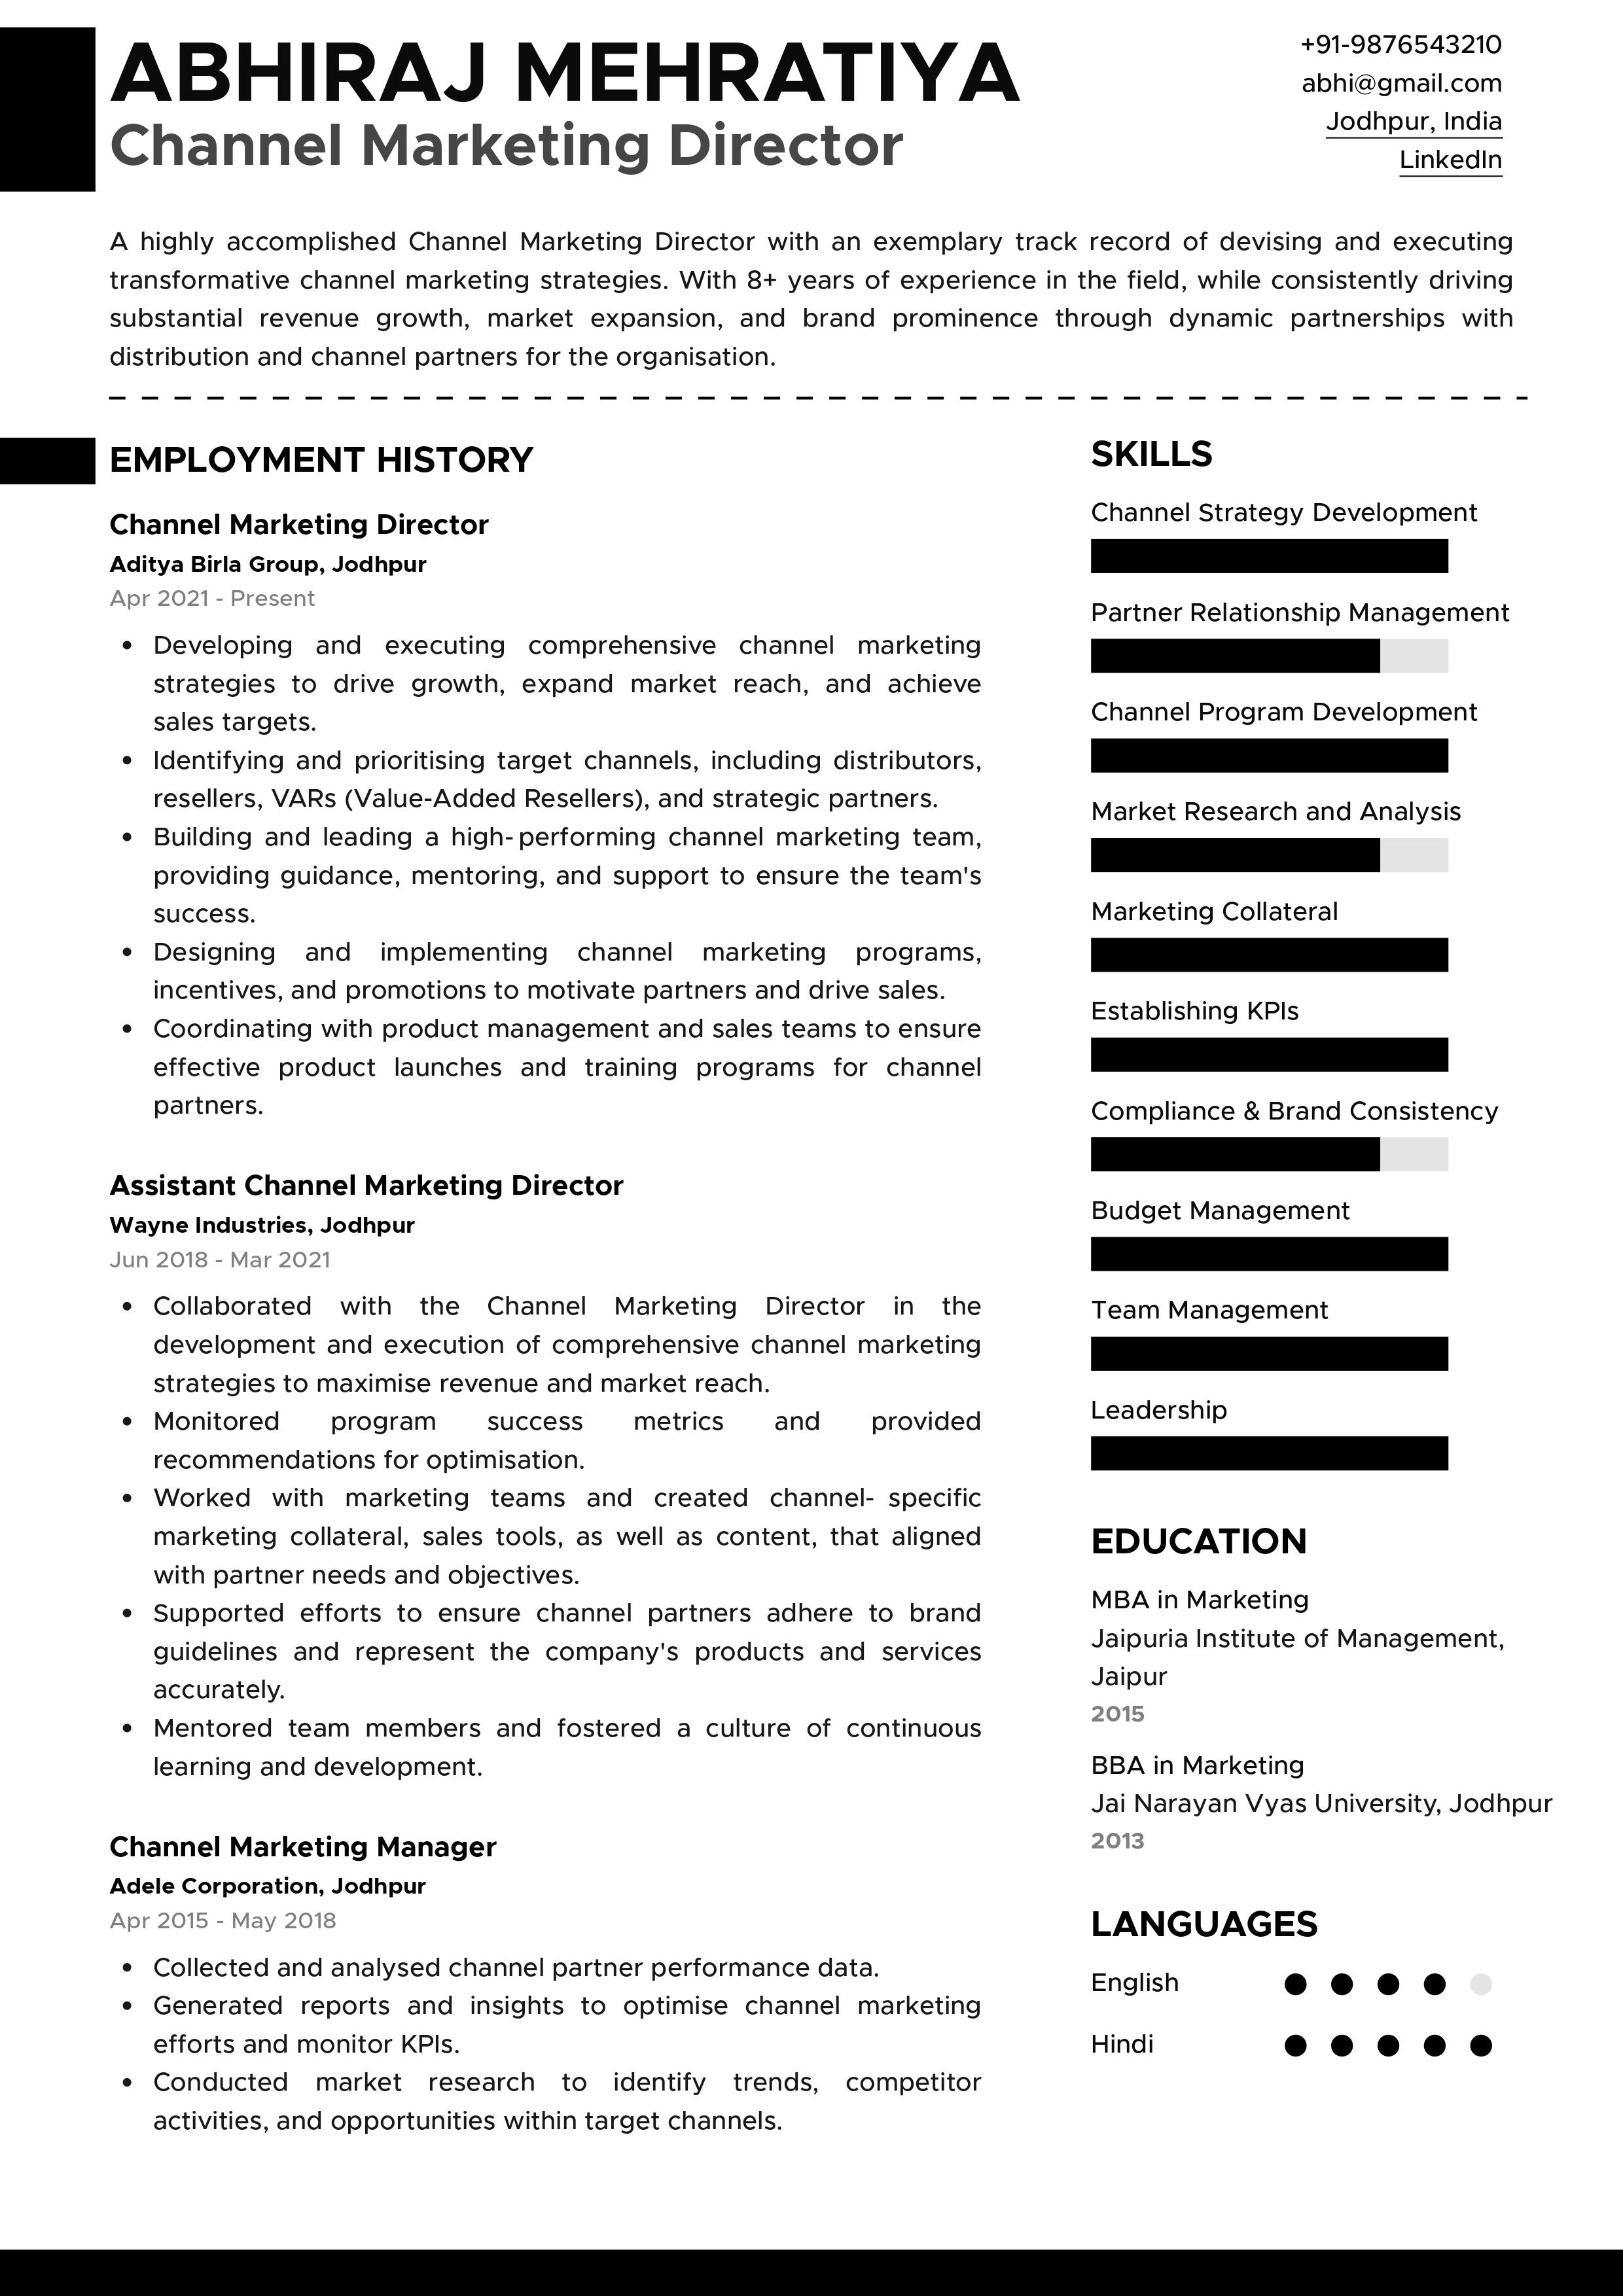 Sample Resume of Channel Marketing Director | Free Resume Templates & Samples on Resumod.co